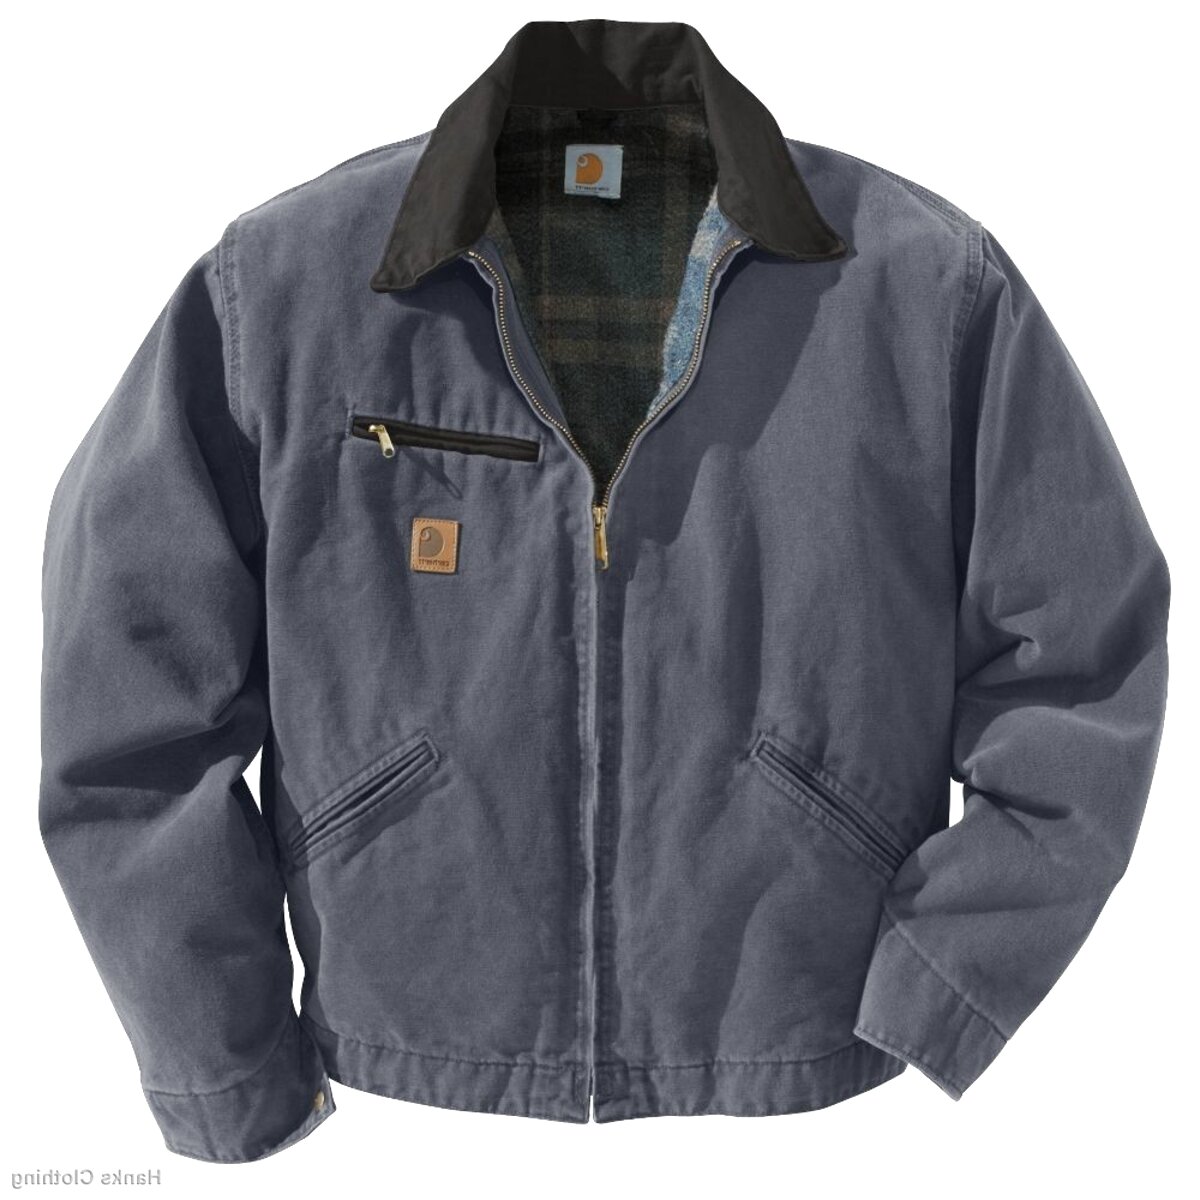 Carhartt Detroit Jacket for sale in UK | 52 used Carhartt Detroit Jackets